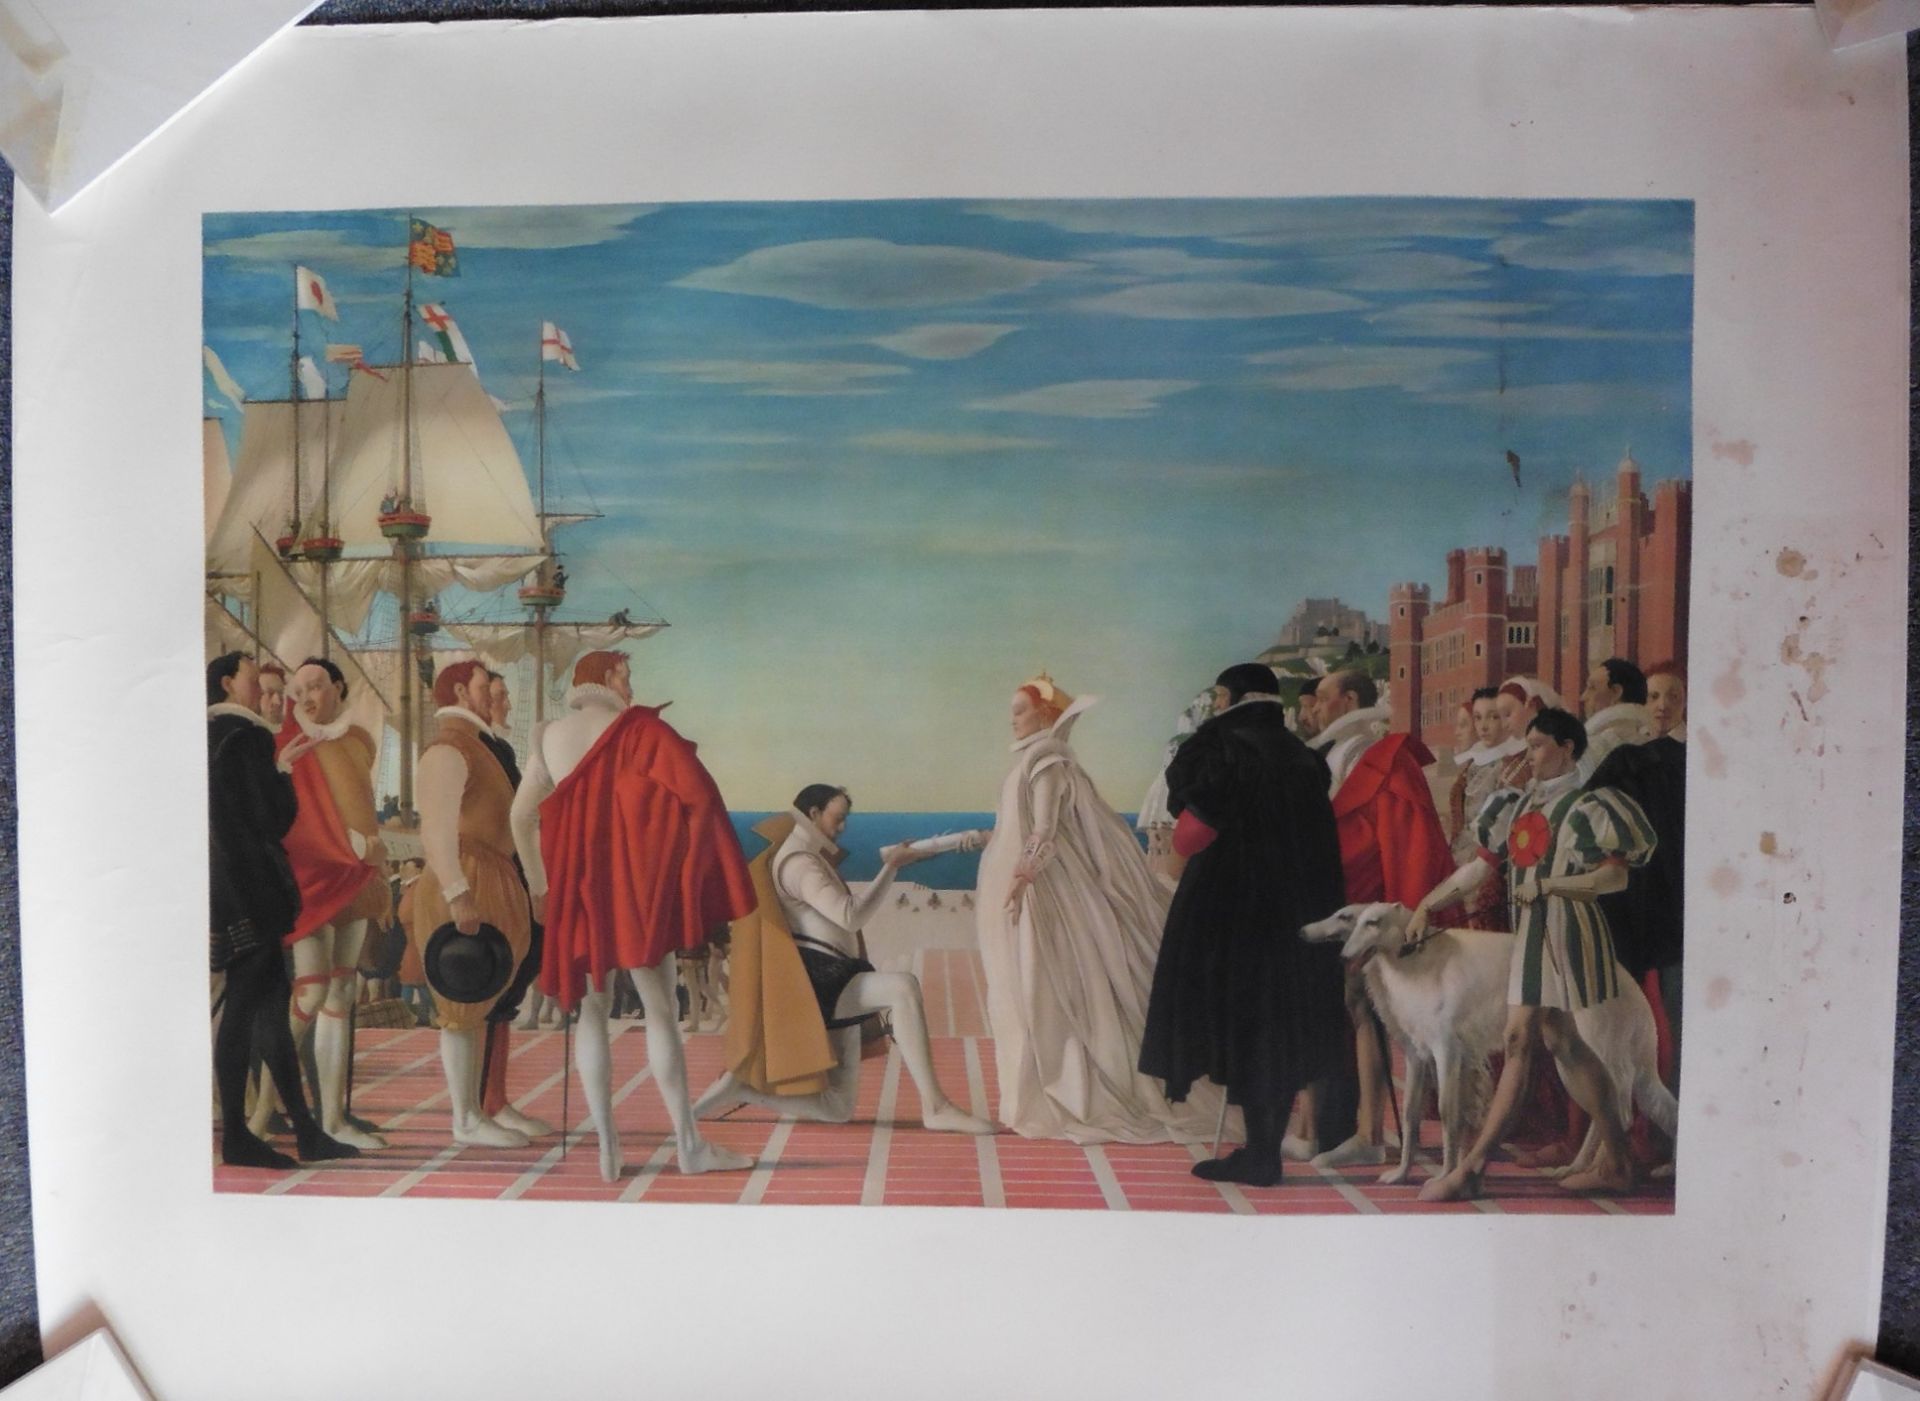 Vintage Thomas Nelson and sons art print possibly from an artwork by George Morrow - Image 3 of 3